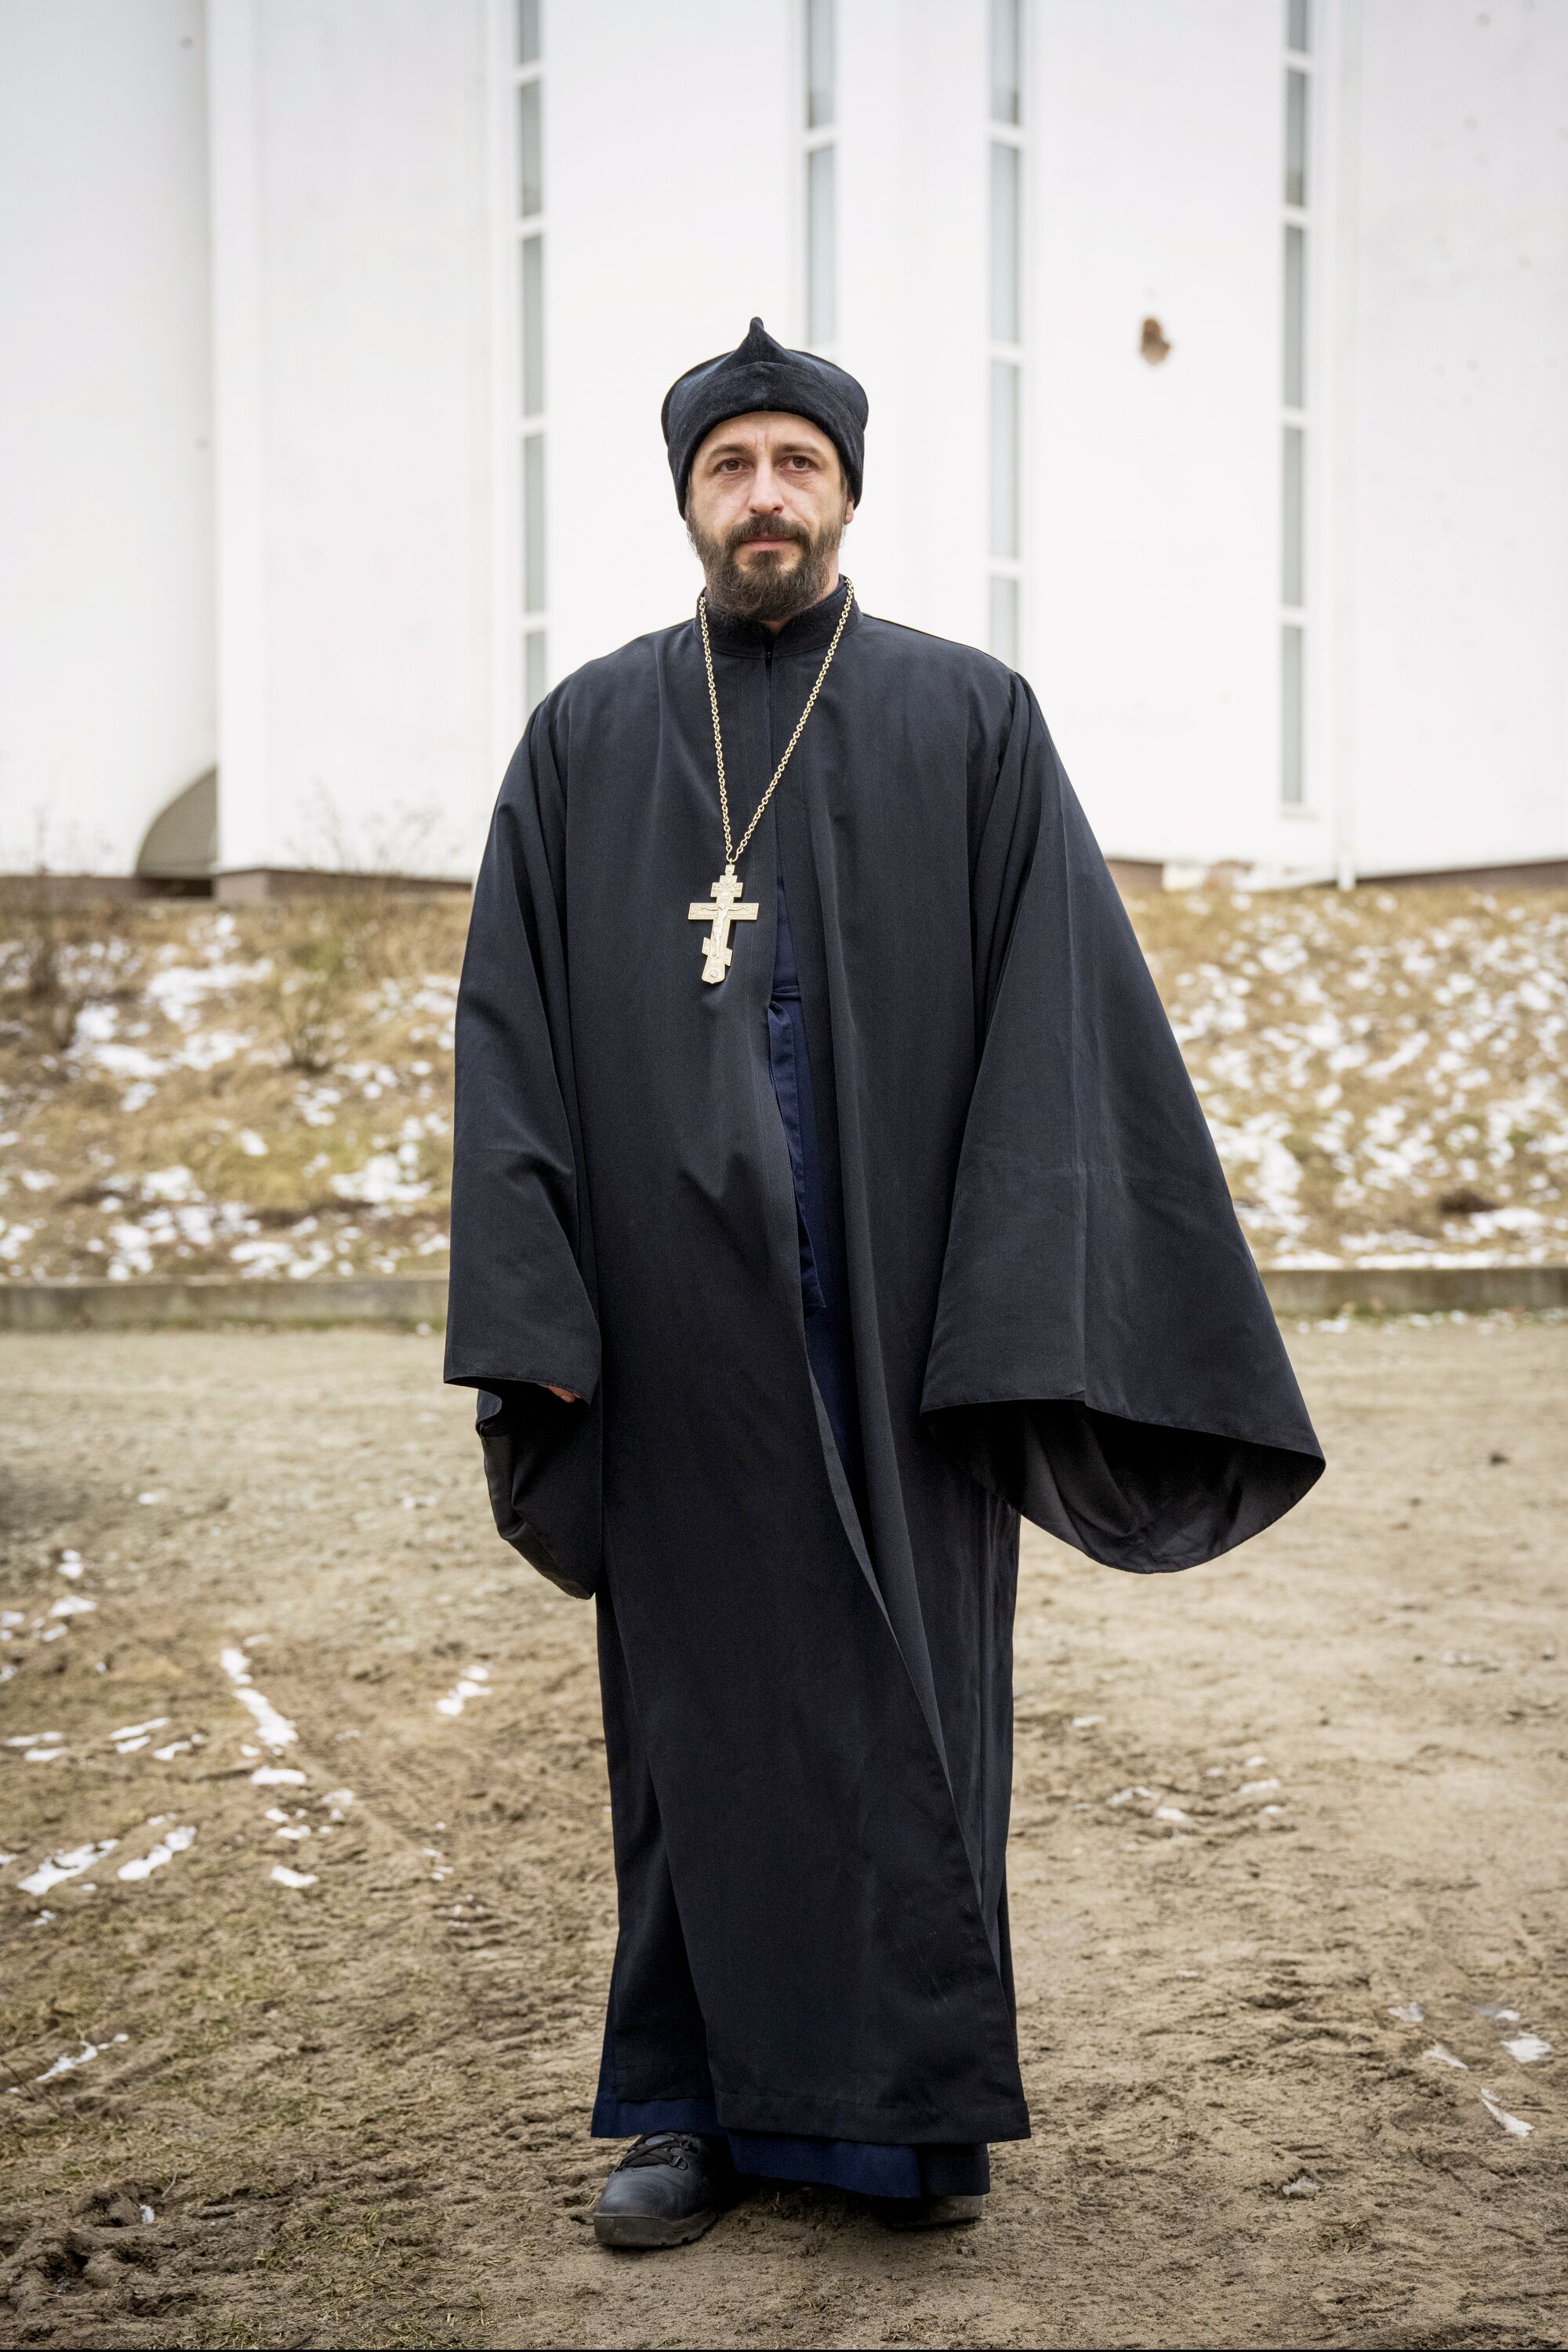 A priest, dressed in black robe, black cap, and wearing a large cross on a chain, poses for a  portrait.